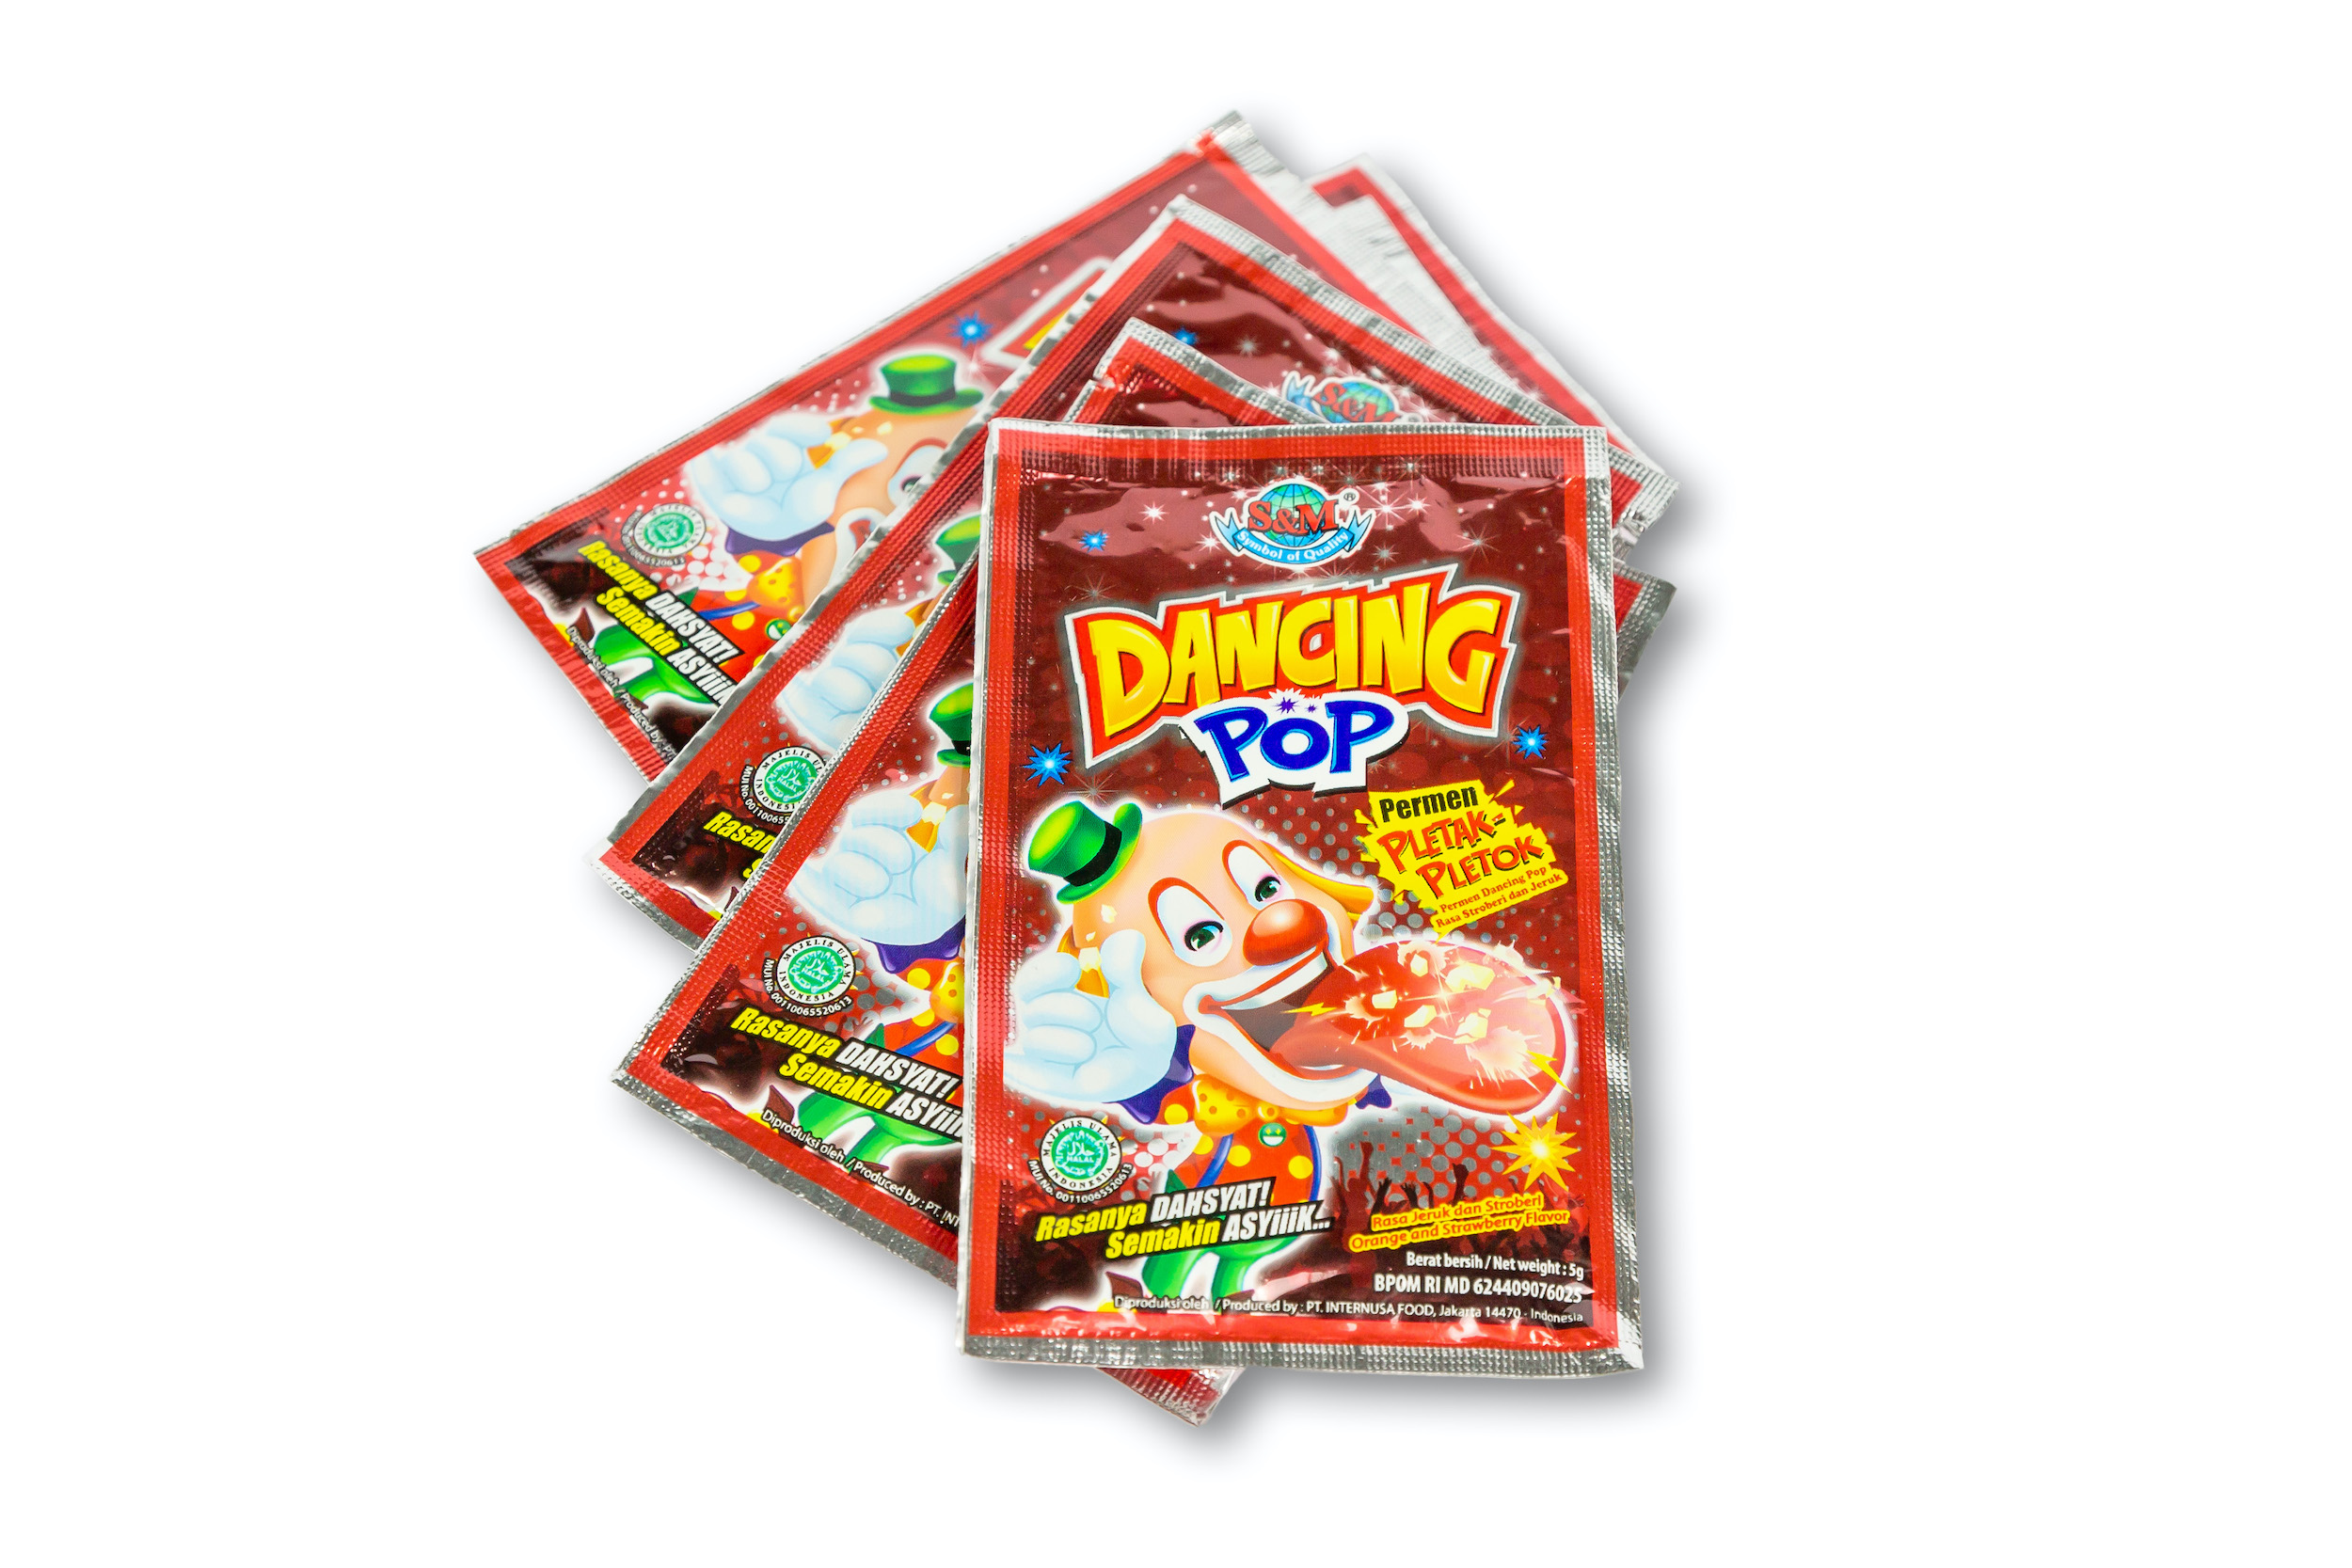 Have a Taste of Popping Fun!   You may remember it as one of the most entertaining candies during your childhood. The popping sensation, the distinctive crackling sound, and the vibration you feel in your eardrum is simply AMAZING and FUNTASTIC! Known by many names—Popping Candy, Sparkling Sugar, Crackle Crystals—the popularity of this retro candy has never waned as it is still exceedingly popular with kids nowadays. With Dancing Pop, we continue the tradition of this distinctive candy to make sure that it will never stop popping.  Dancing Pop comes in two fruity and refreshing flavours—strawberry and orange. We take pride in being the only one producing this product locally in the Indonesian market. Employing state-of-the-art technology from Japan, the delicate candy is produced to the finest quality with superior ingredients. Its popularity is also due to its versatility in wide ranging application.  Our product has been used by a well-known Taiwanese bubble tea chain as one of its toppings for their drinks. Dancing Pop is also perfect for desserts as it can be sprinkled directly onto butter icing, chocolate truffles and included in chilled cake bases.  Dancing Pop is manufactured by PT. Internusa Food, a modern and innovative confectionery and candy manufacturer in Indonesia with longstanding tradition of excellence. Competitively-priced to cater the middle-low market segments, PT. Internusa Food has produced well-known brands loved by the Indonesian customers and overseas markets over the years. The Company’s products have been exported to many countries in Southeast Asia, Asia Pacific, U.S.A, the Middle East and Africa. Its high-quality products follows the ISO 22000:2005 Food Safety Management System and the Indonesian Food and Drug Monitoring Agency (BPOM). All products are also Halal-certified by Indonesian Ulama Council (MUI). Dancing Pop is available for bulk purchasing with B2B wholesale price.   Package content: 6boxes @40pcs @5g